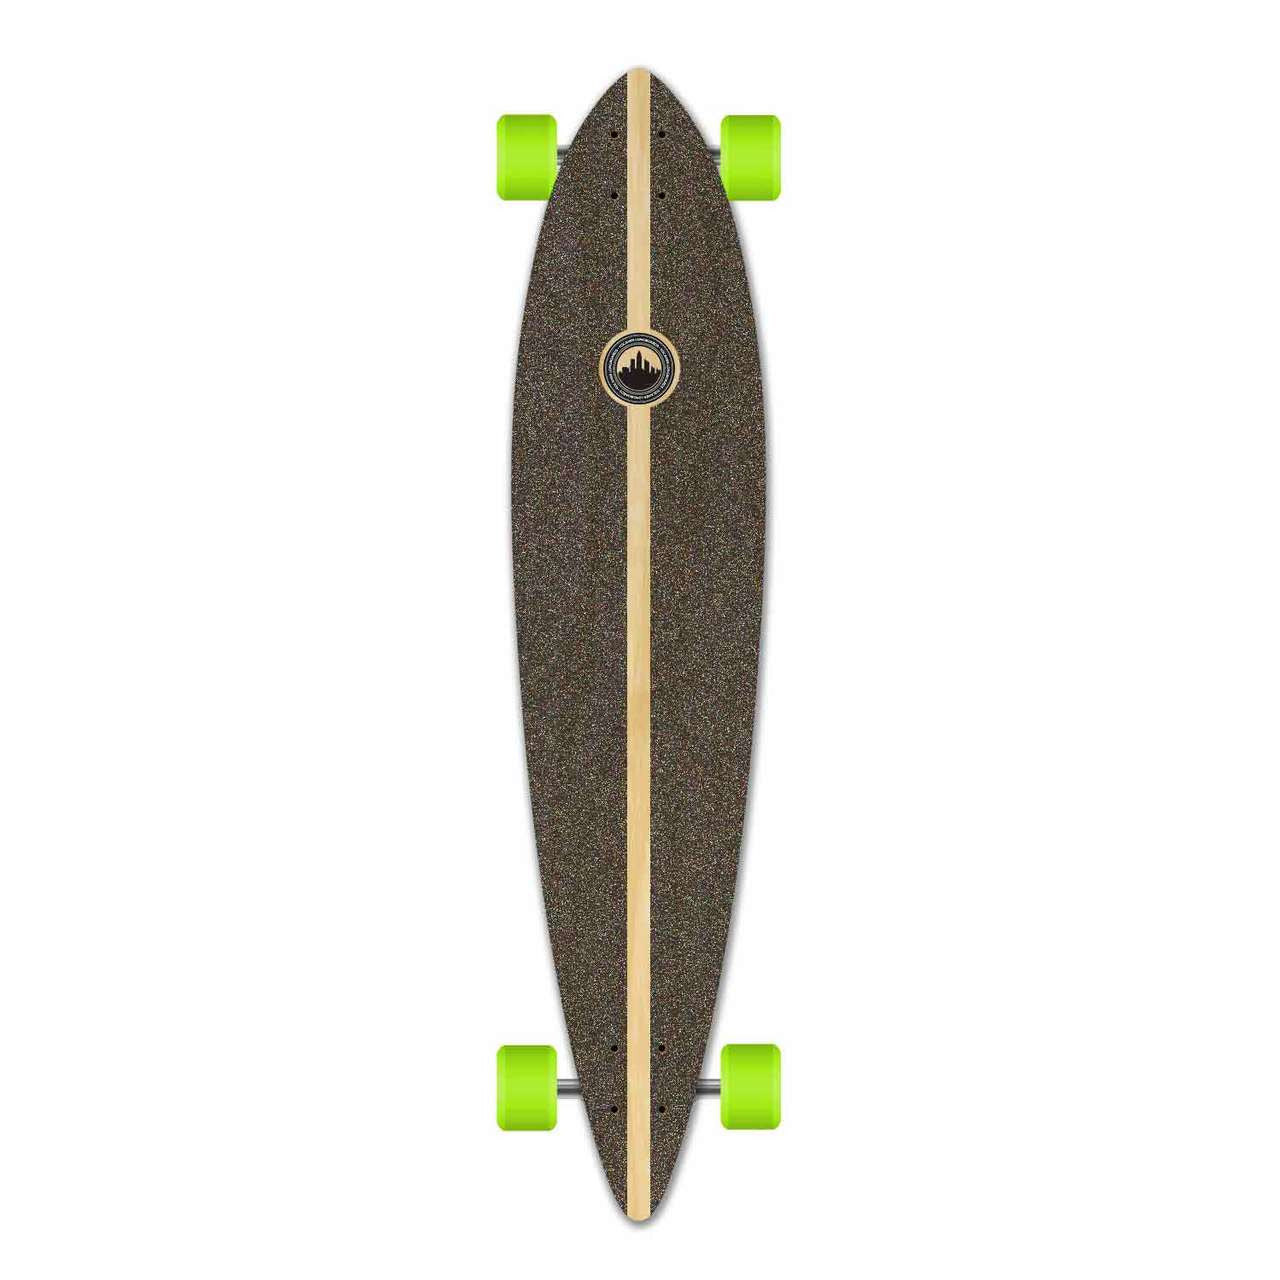 Yocaher Pintail Longboard Complete - Shades White